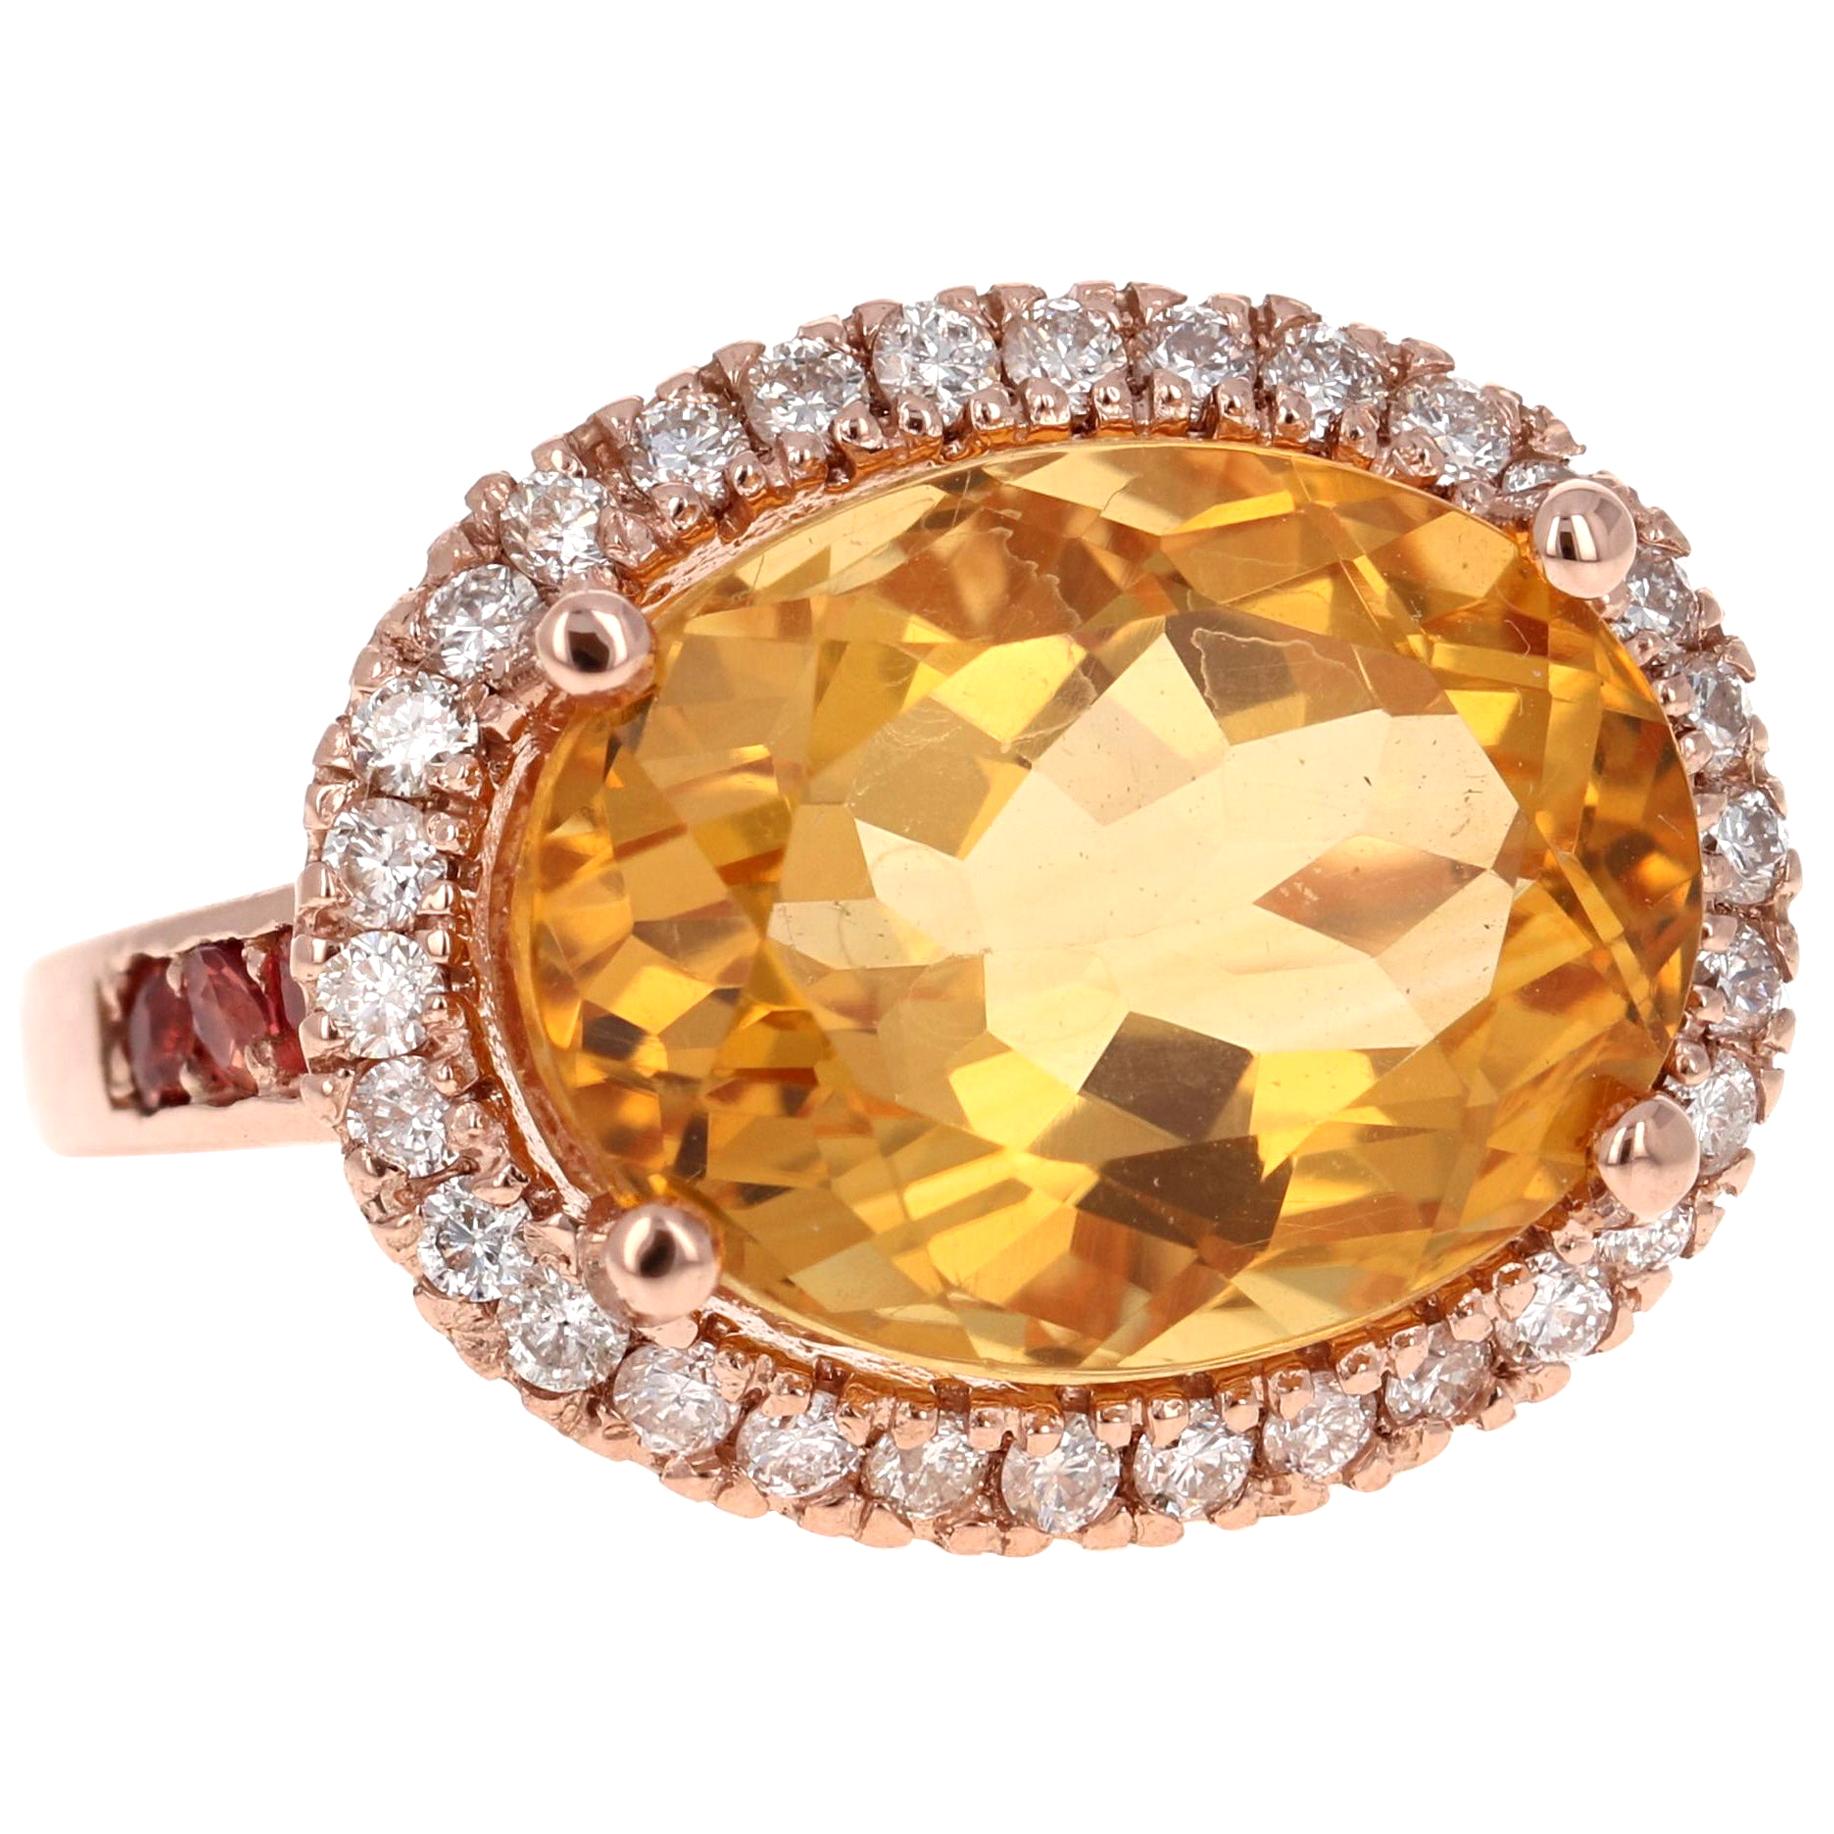 10.74 Carat Oval Cut Citrine Diamond Rose Gold Engagement Ring For Sale